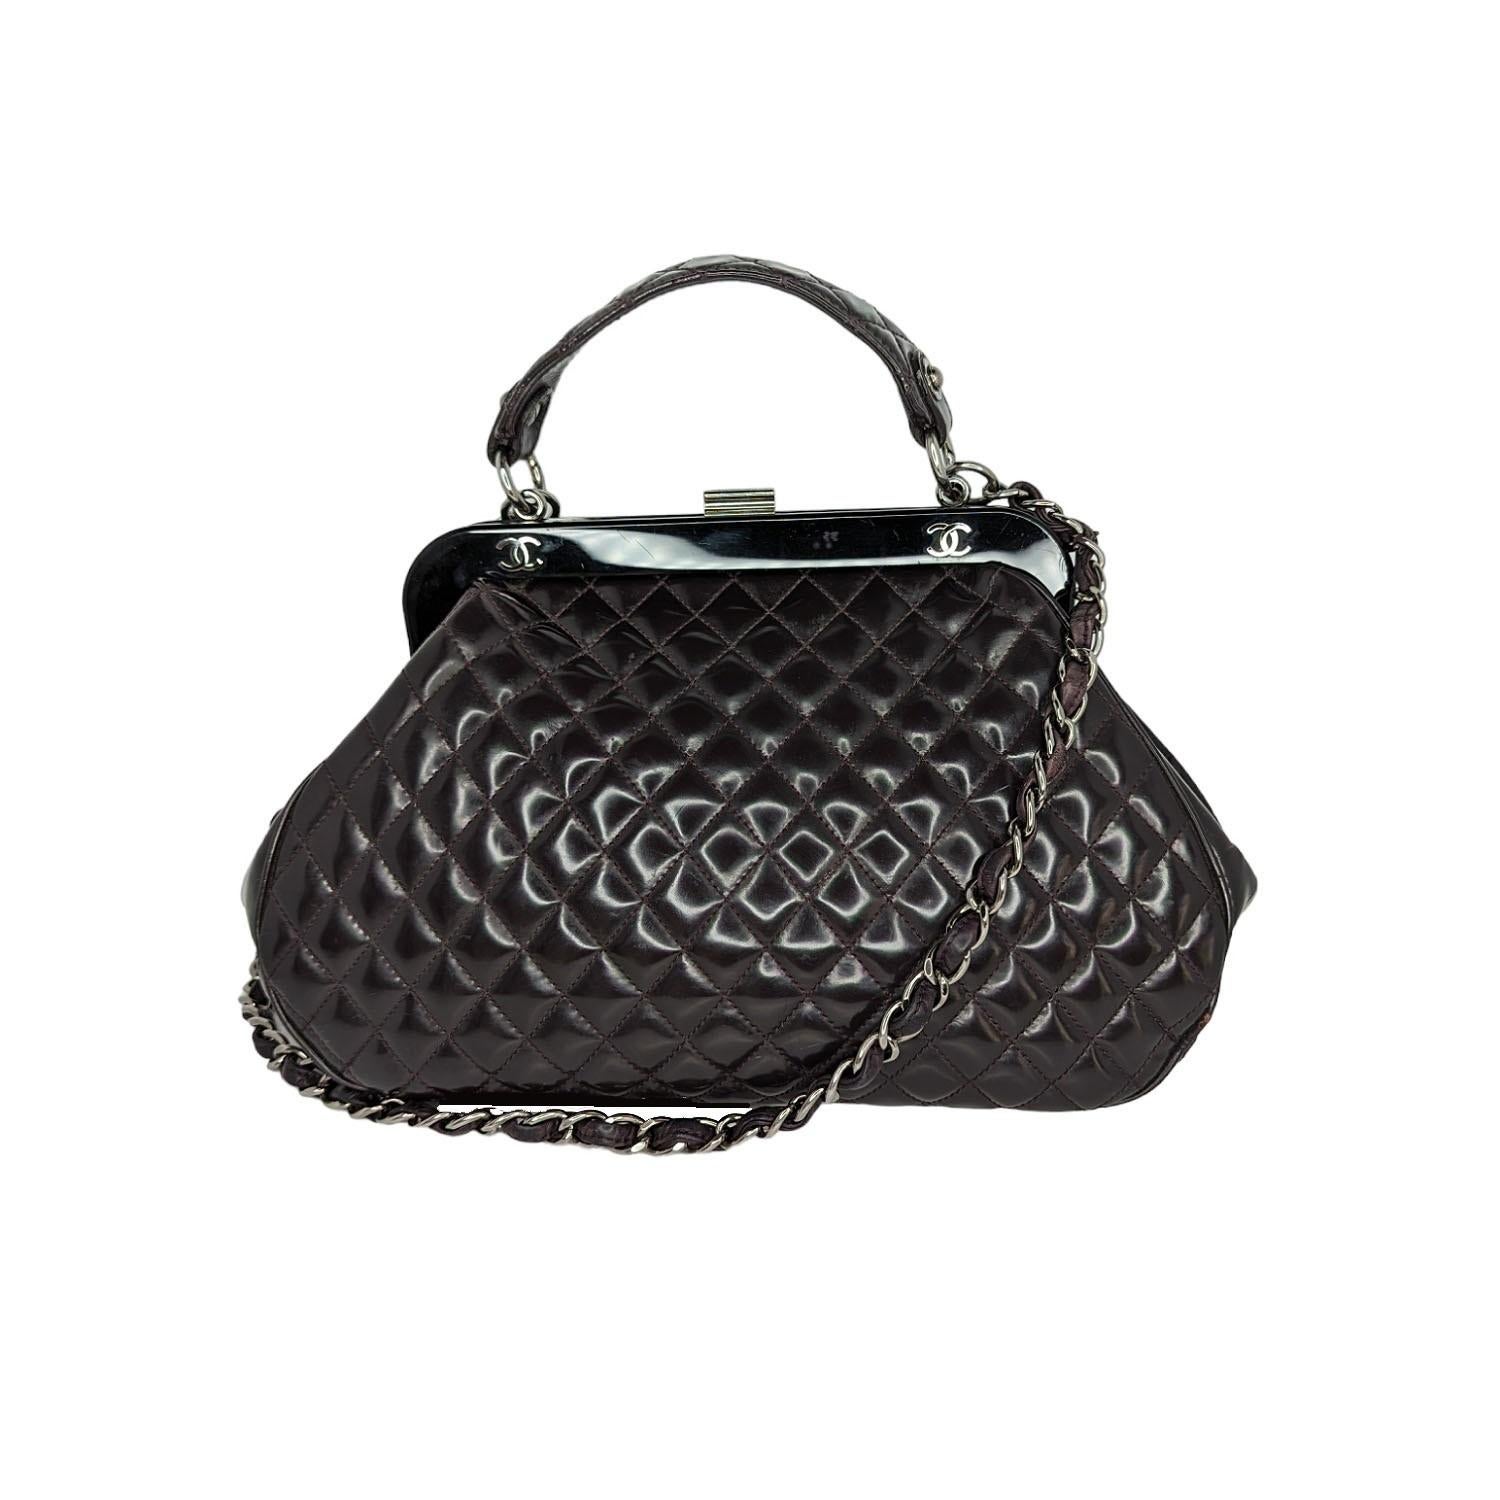 Eggplant quilted patent leather Chanel Mademoiselle Frame satchel with silver-tone hardware, single flat top handle, leather and chain-link shoulder strap, resin top frame featuring CC logo emblems, gray striped woven lining, dual pockets at